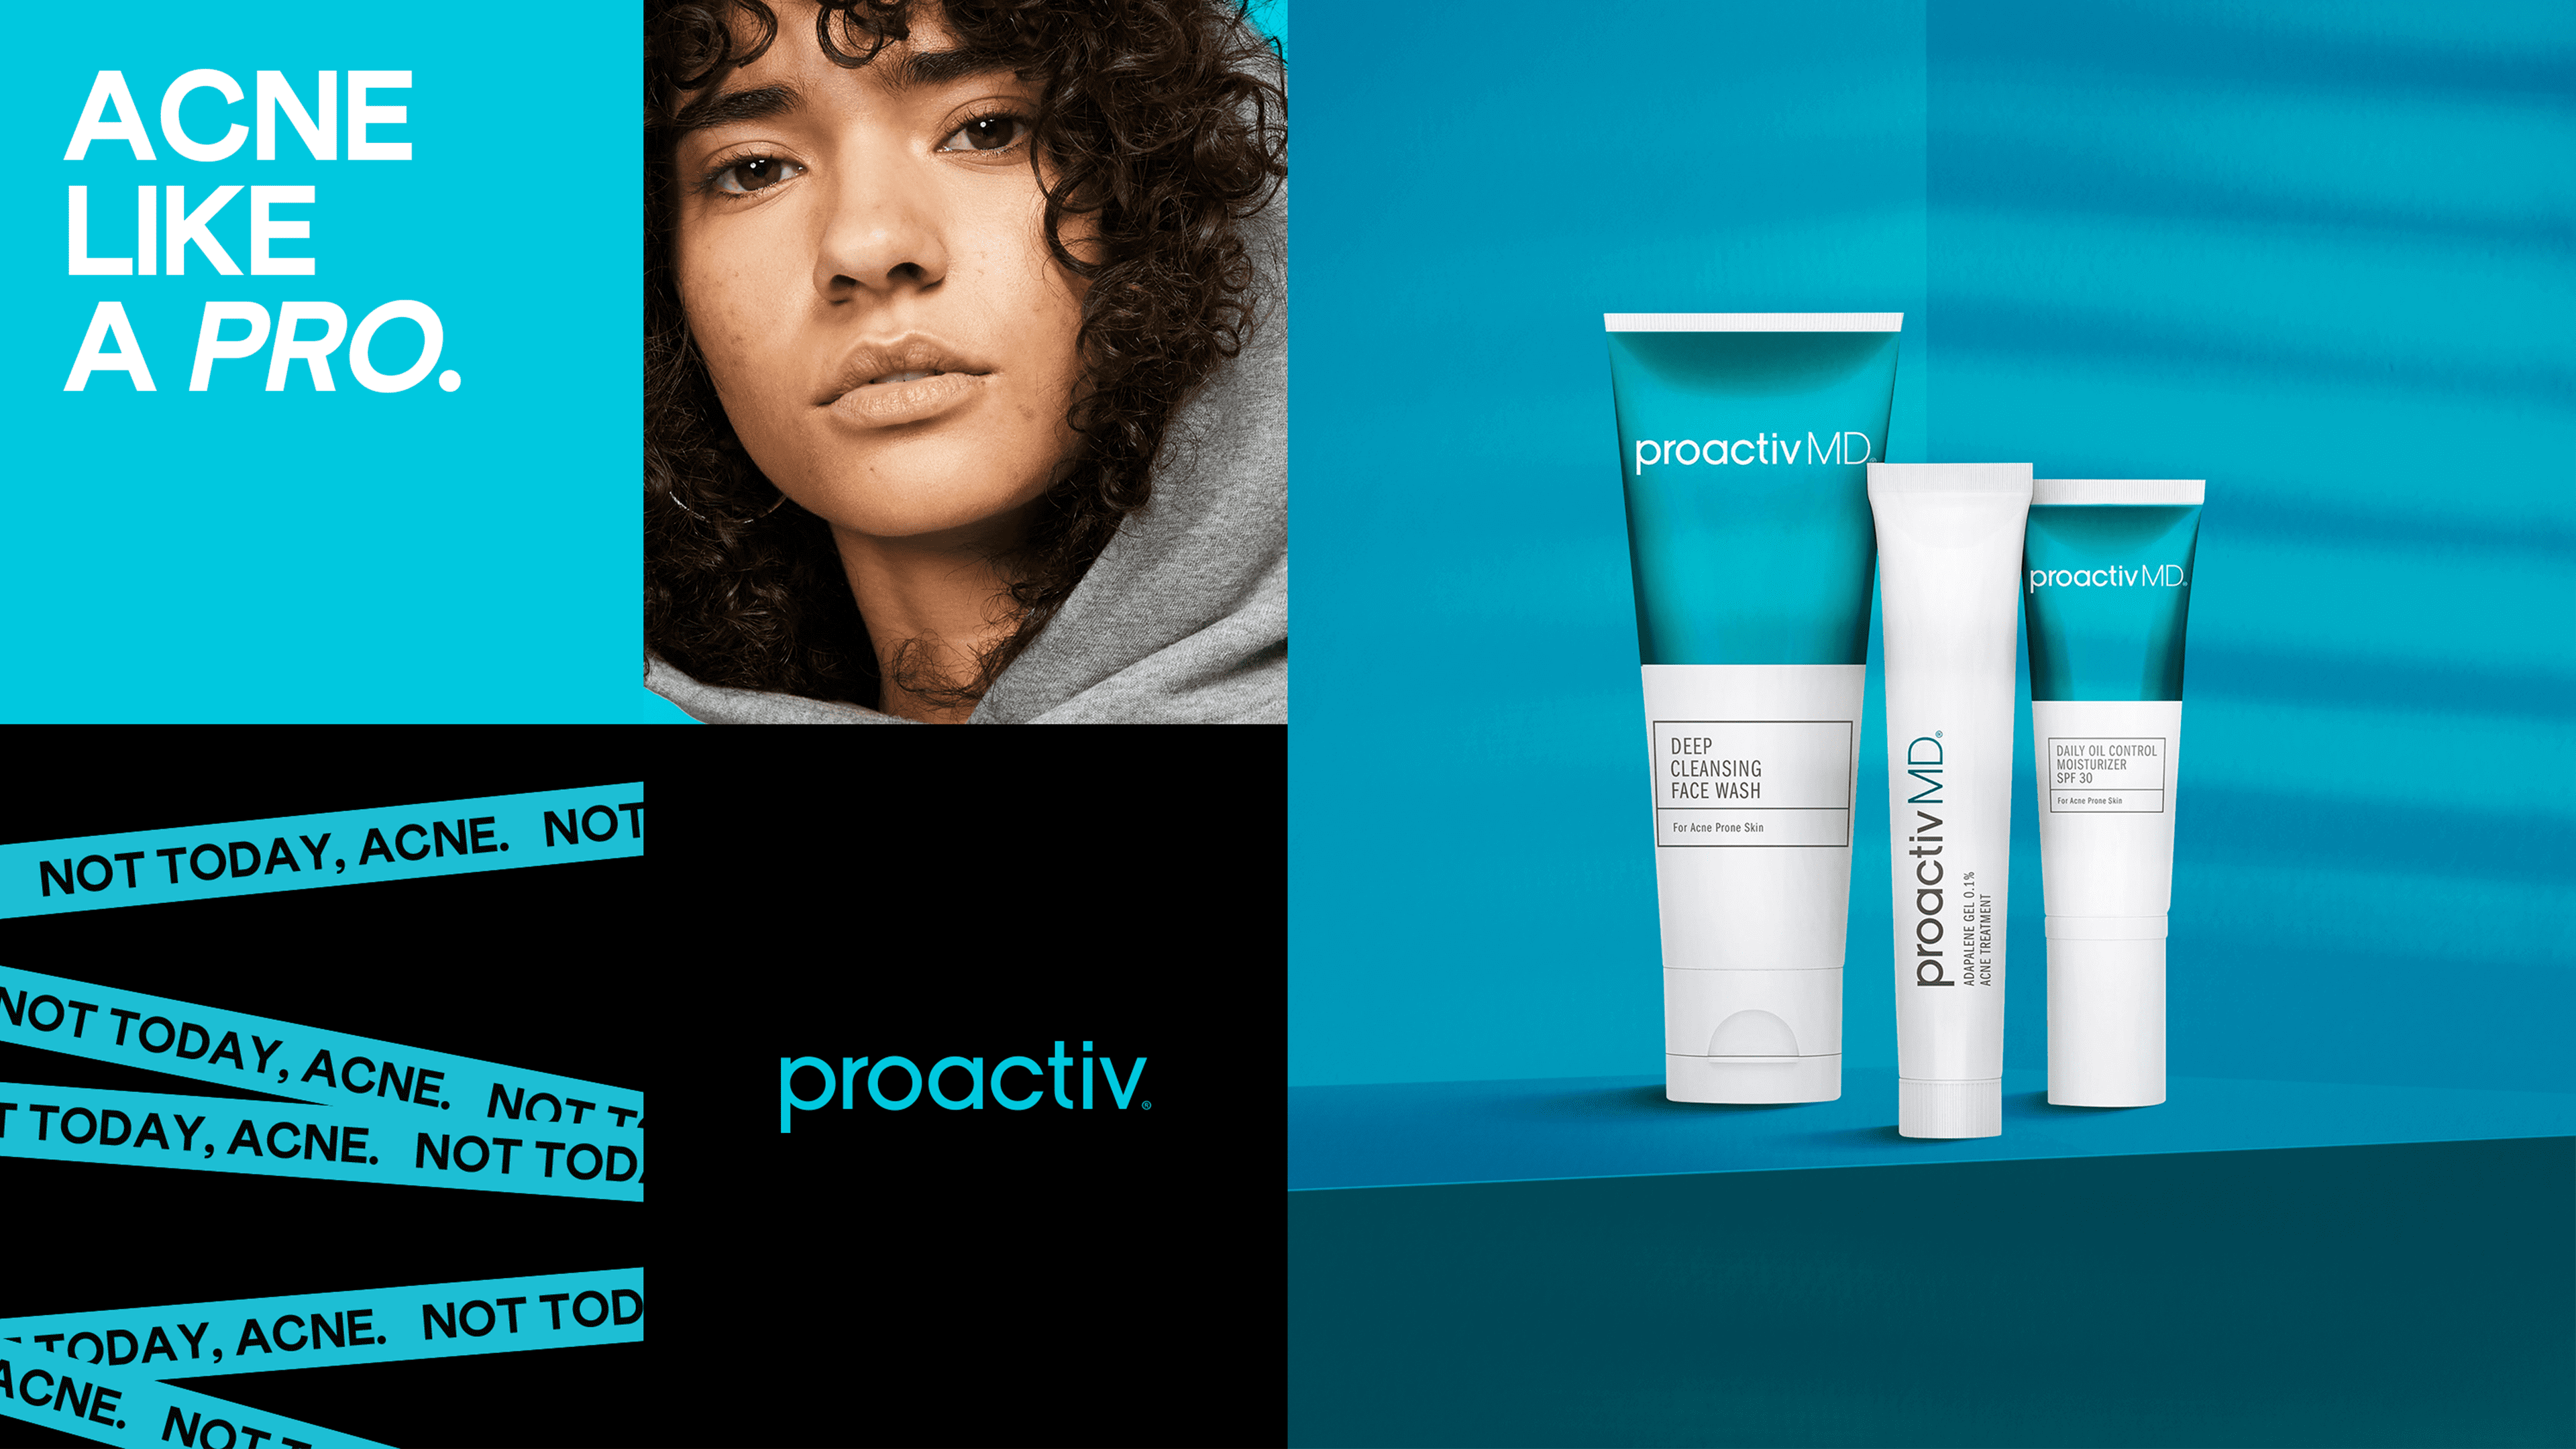 proactiv_Overview